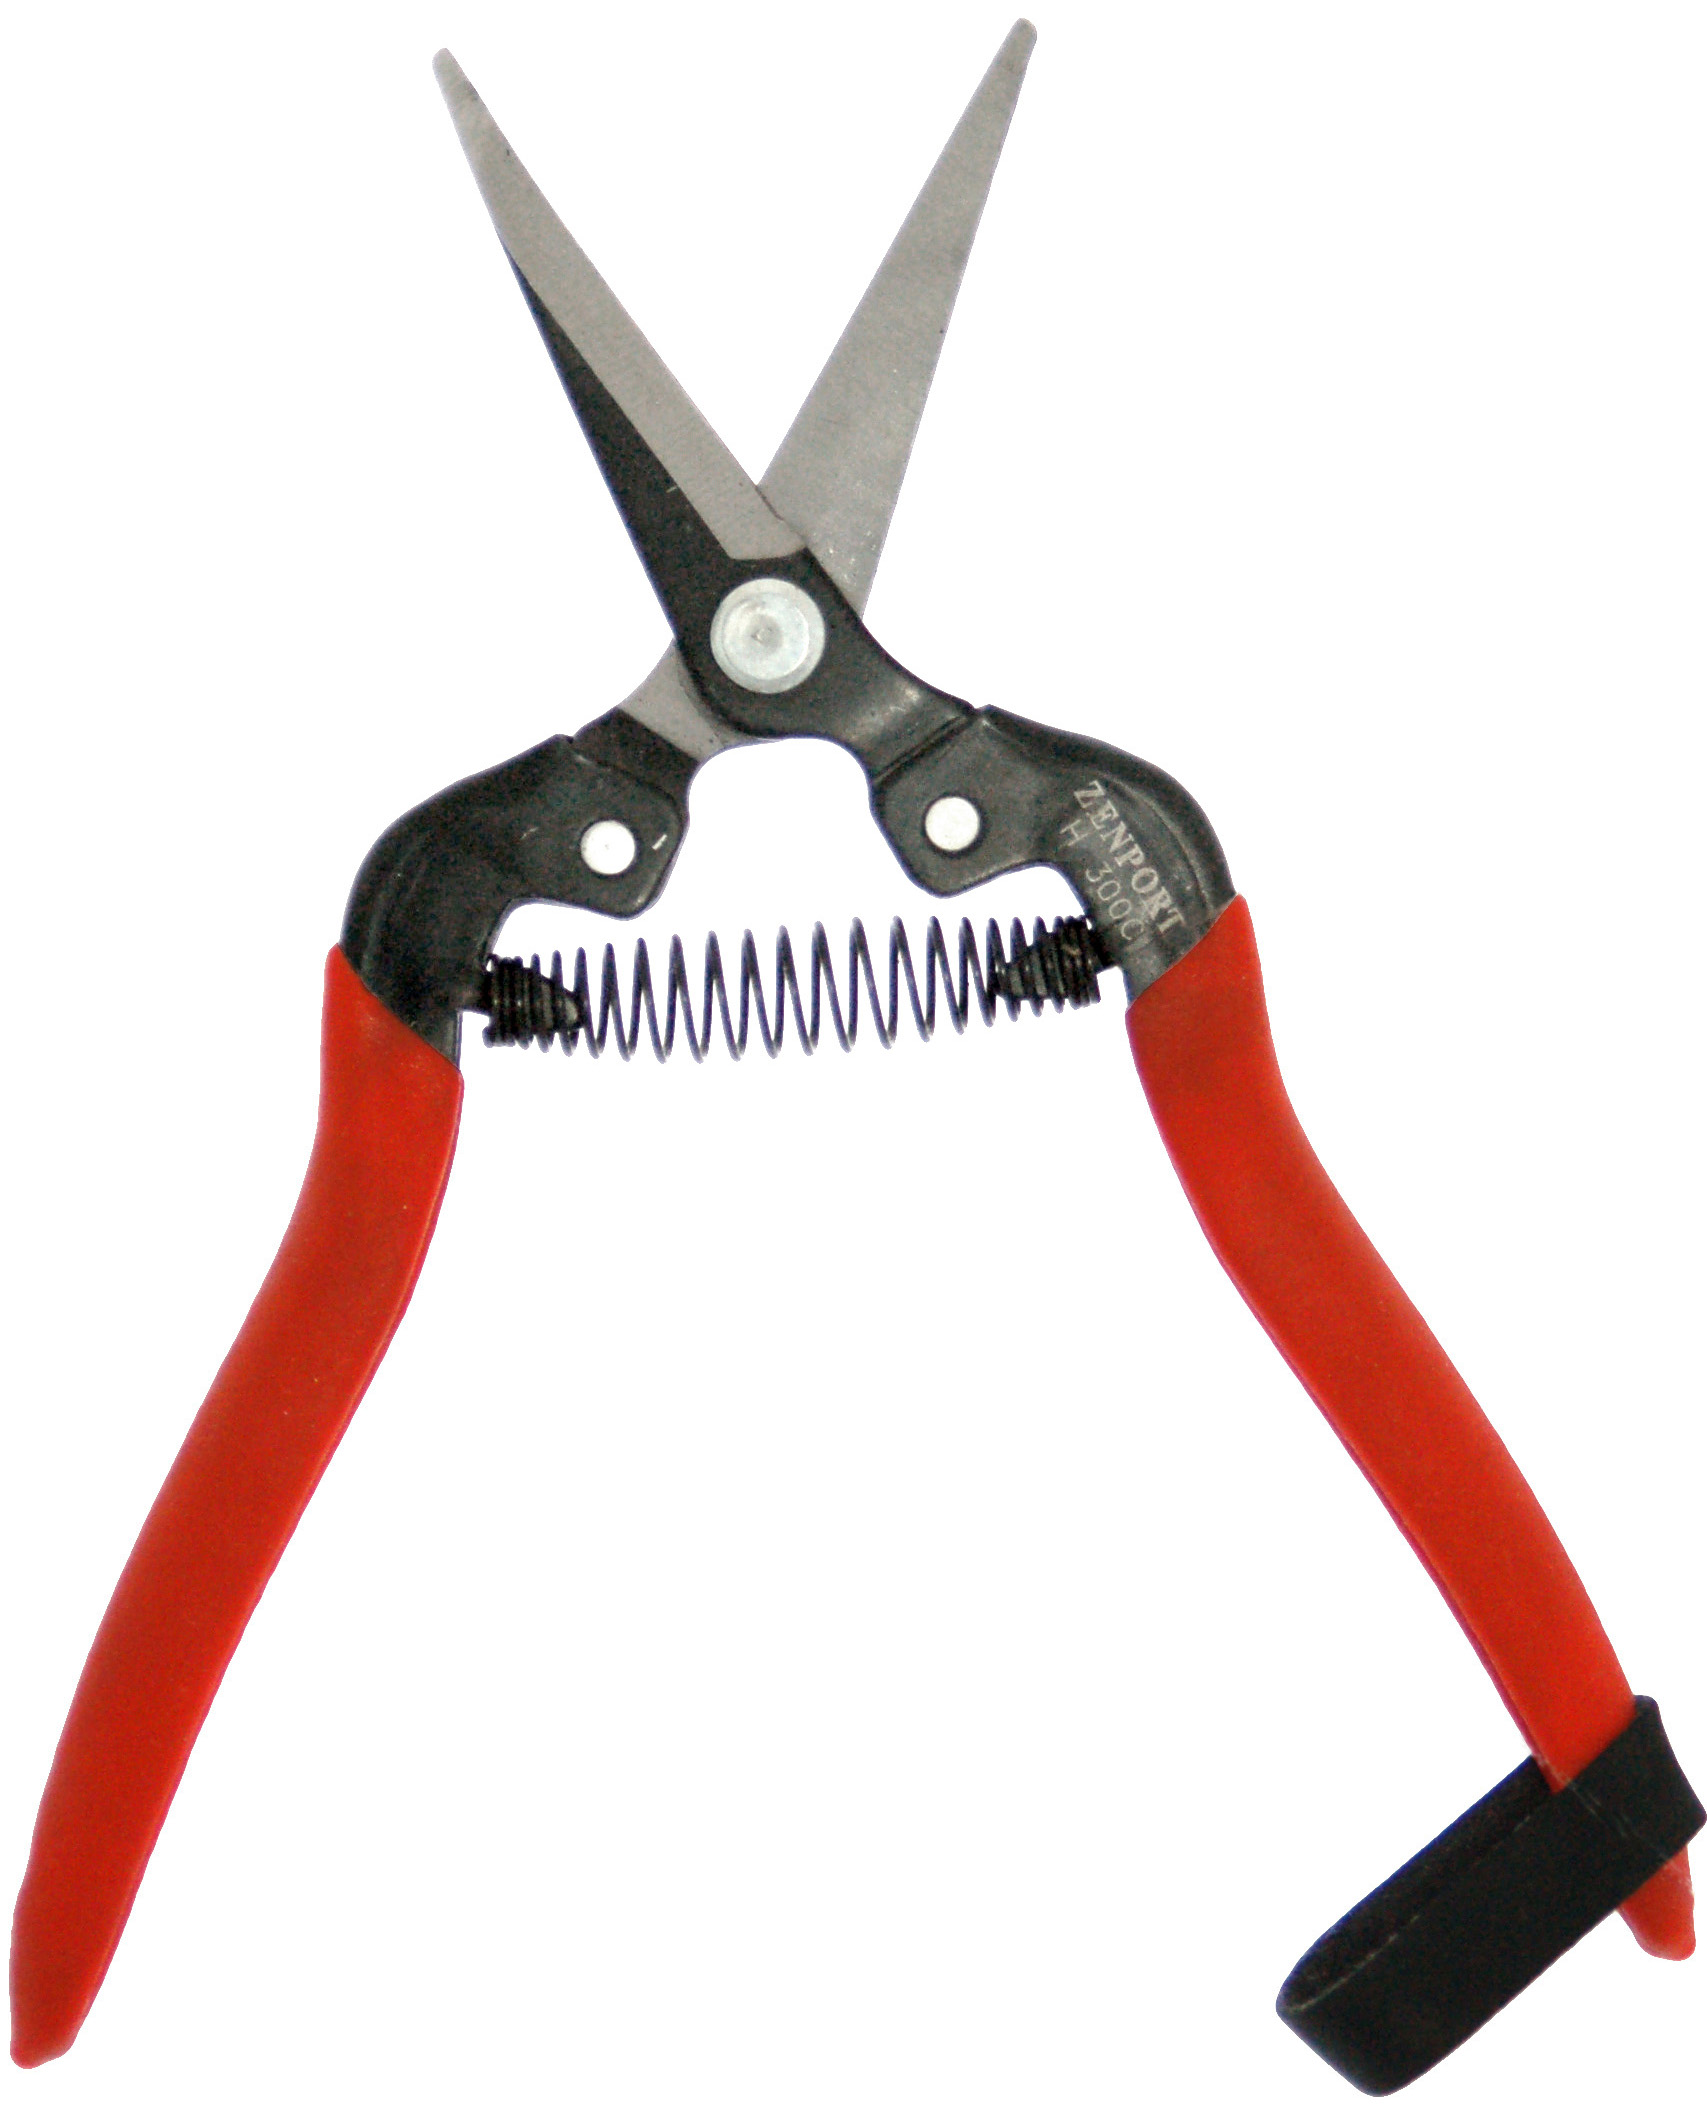 Zenport Shears H300C Harvest Shear, Long Curved Blade, Straight Edge, For Harvesting Grapes, Thinning Plants, Cutting Flowers - Click Image to Close